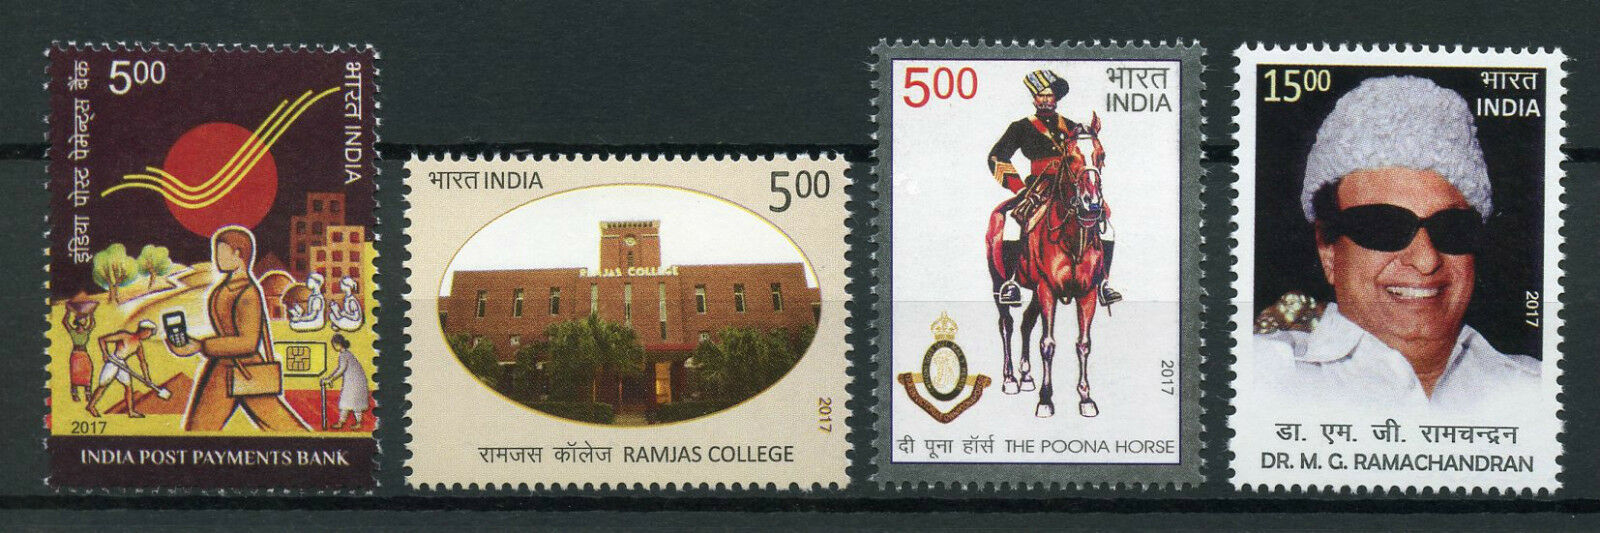 India 2017 MNH Payments Bank Ramjas College Poona Horse Ramachandran 4v Stamps